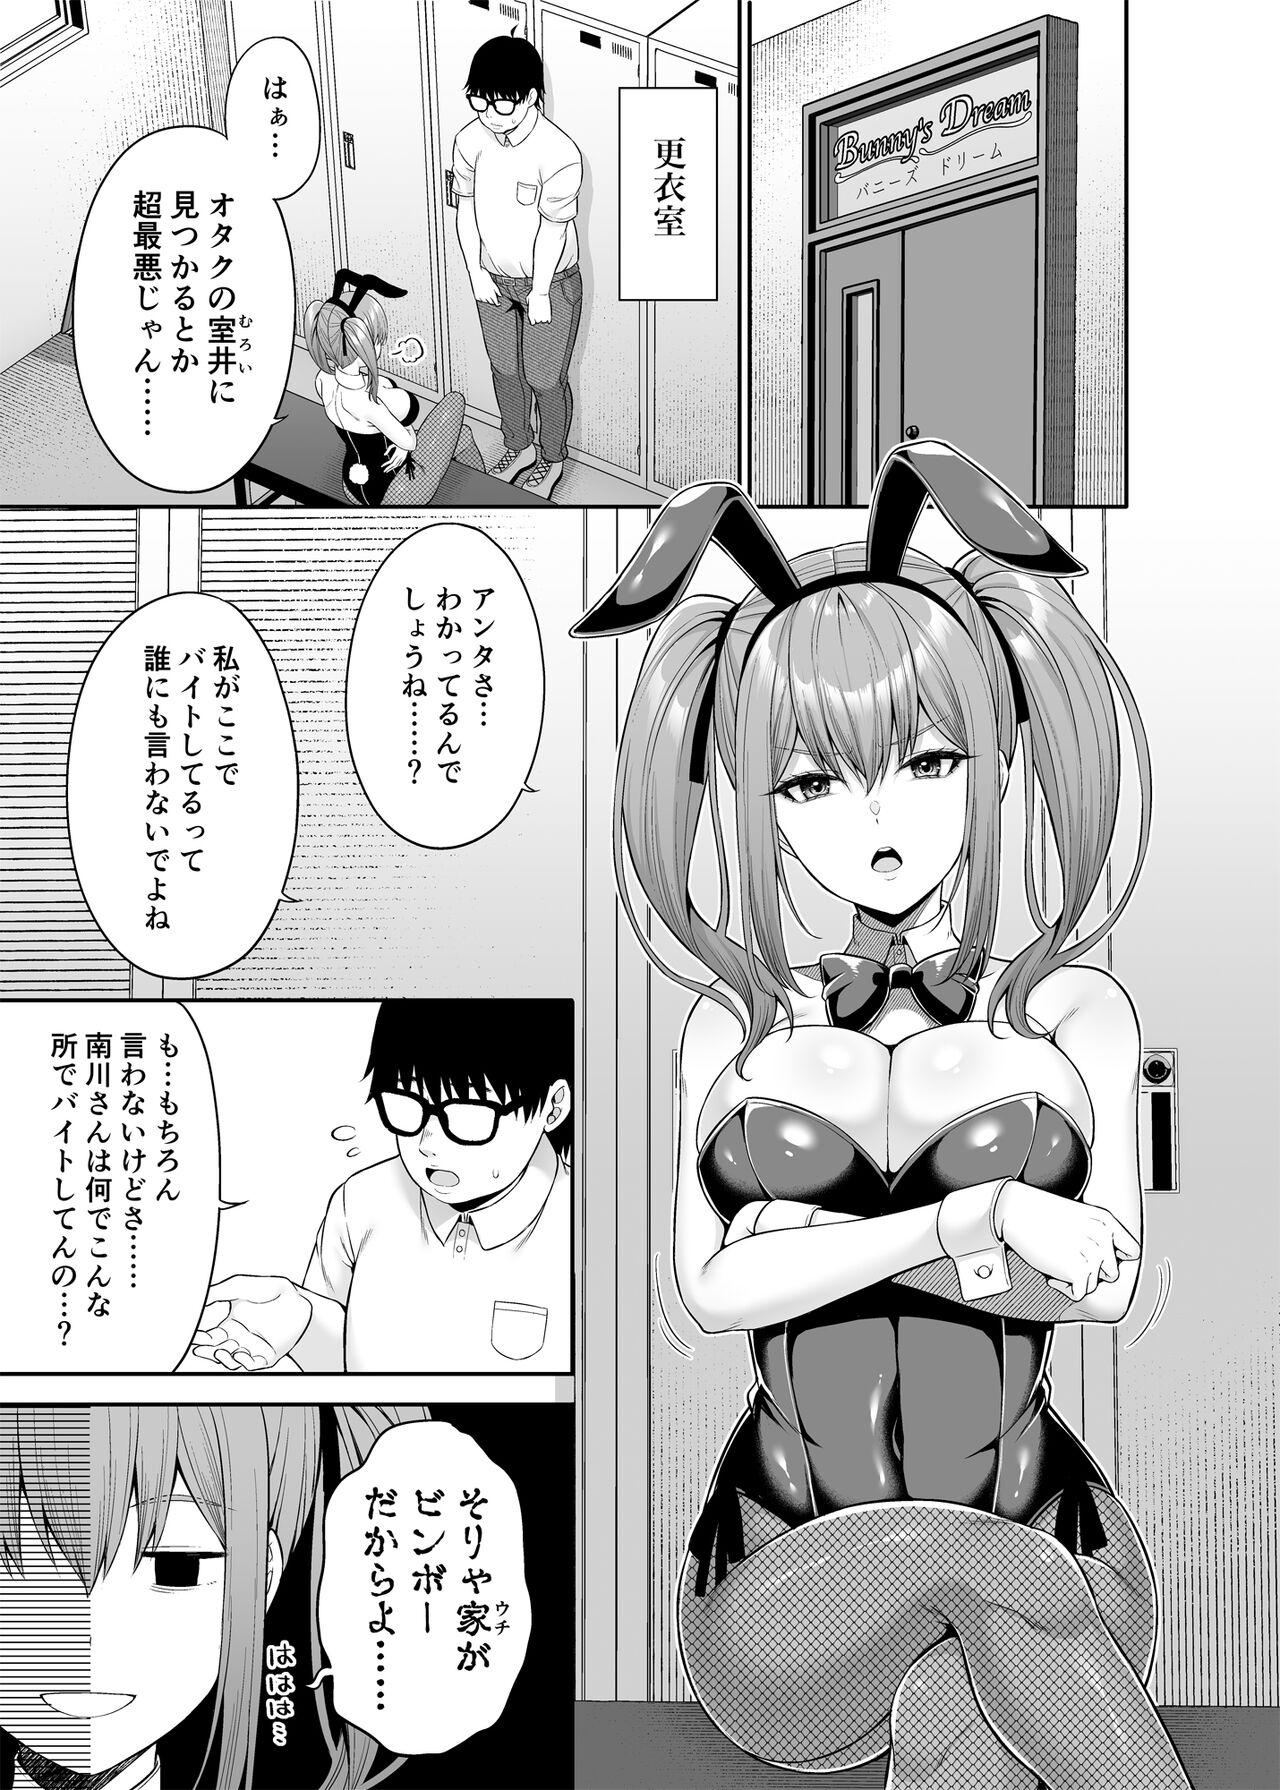 Wet Cunt I'll Lend You My Body - Bunny Girl Edition - Original Pregnant - Page 6